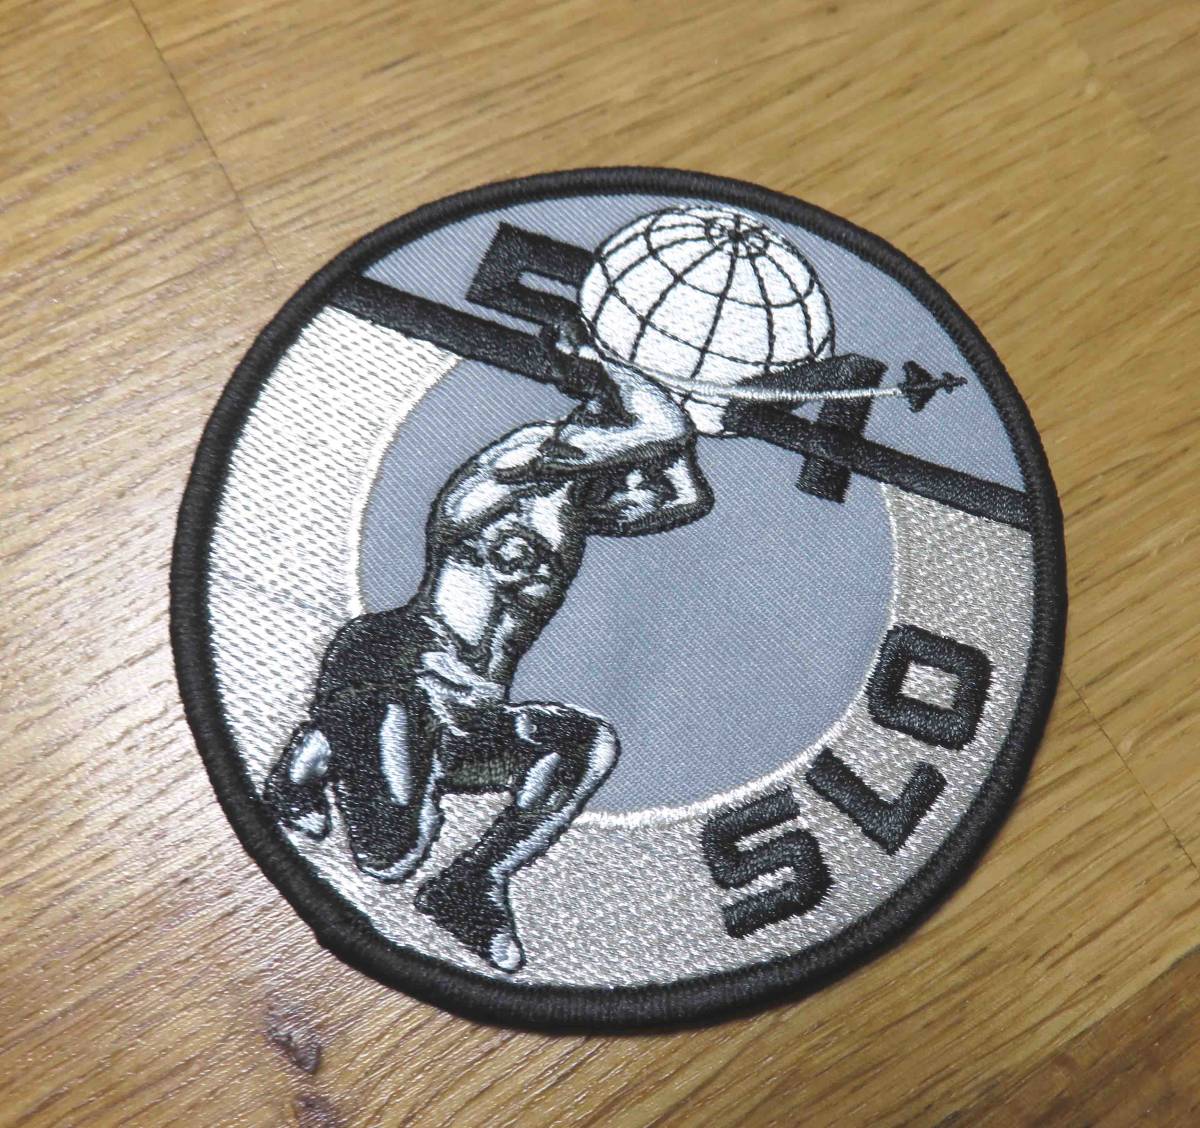 Gray, silver, black (circular) New Italian SLO504° AIR FORCE Ancient Sculpture Soldier Gruppo 4° Stormo Embroidered Patch Military ■ Sculpture Design, sewing, embroidery, patch, Decoration material, patch